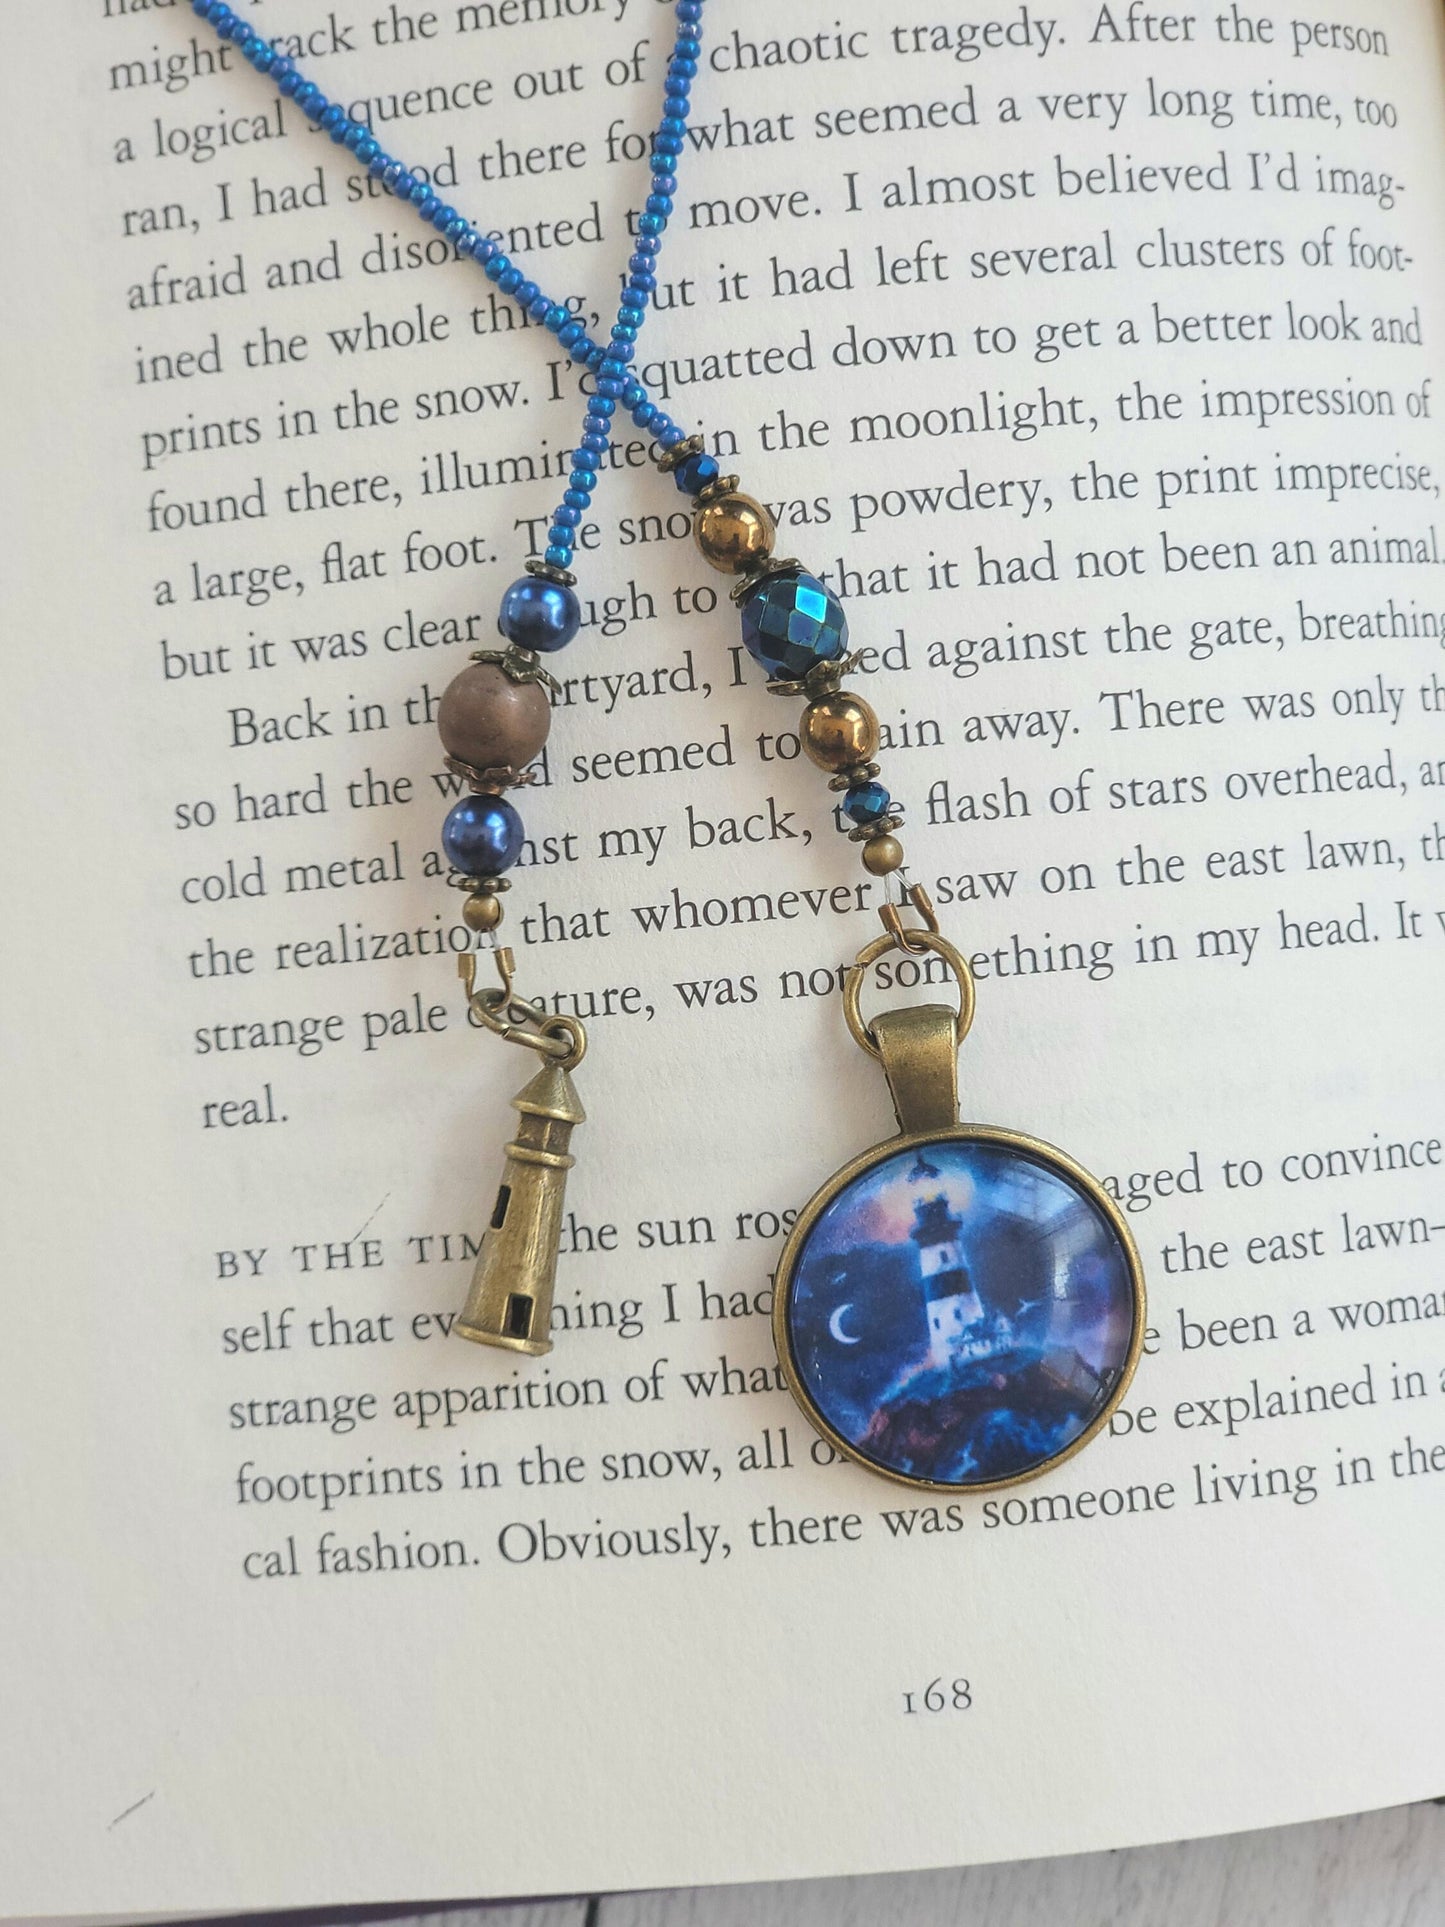 Handmade Beaded Bookmark with Lighthouse Picture Pendant